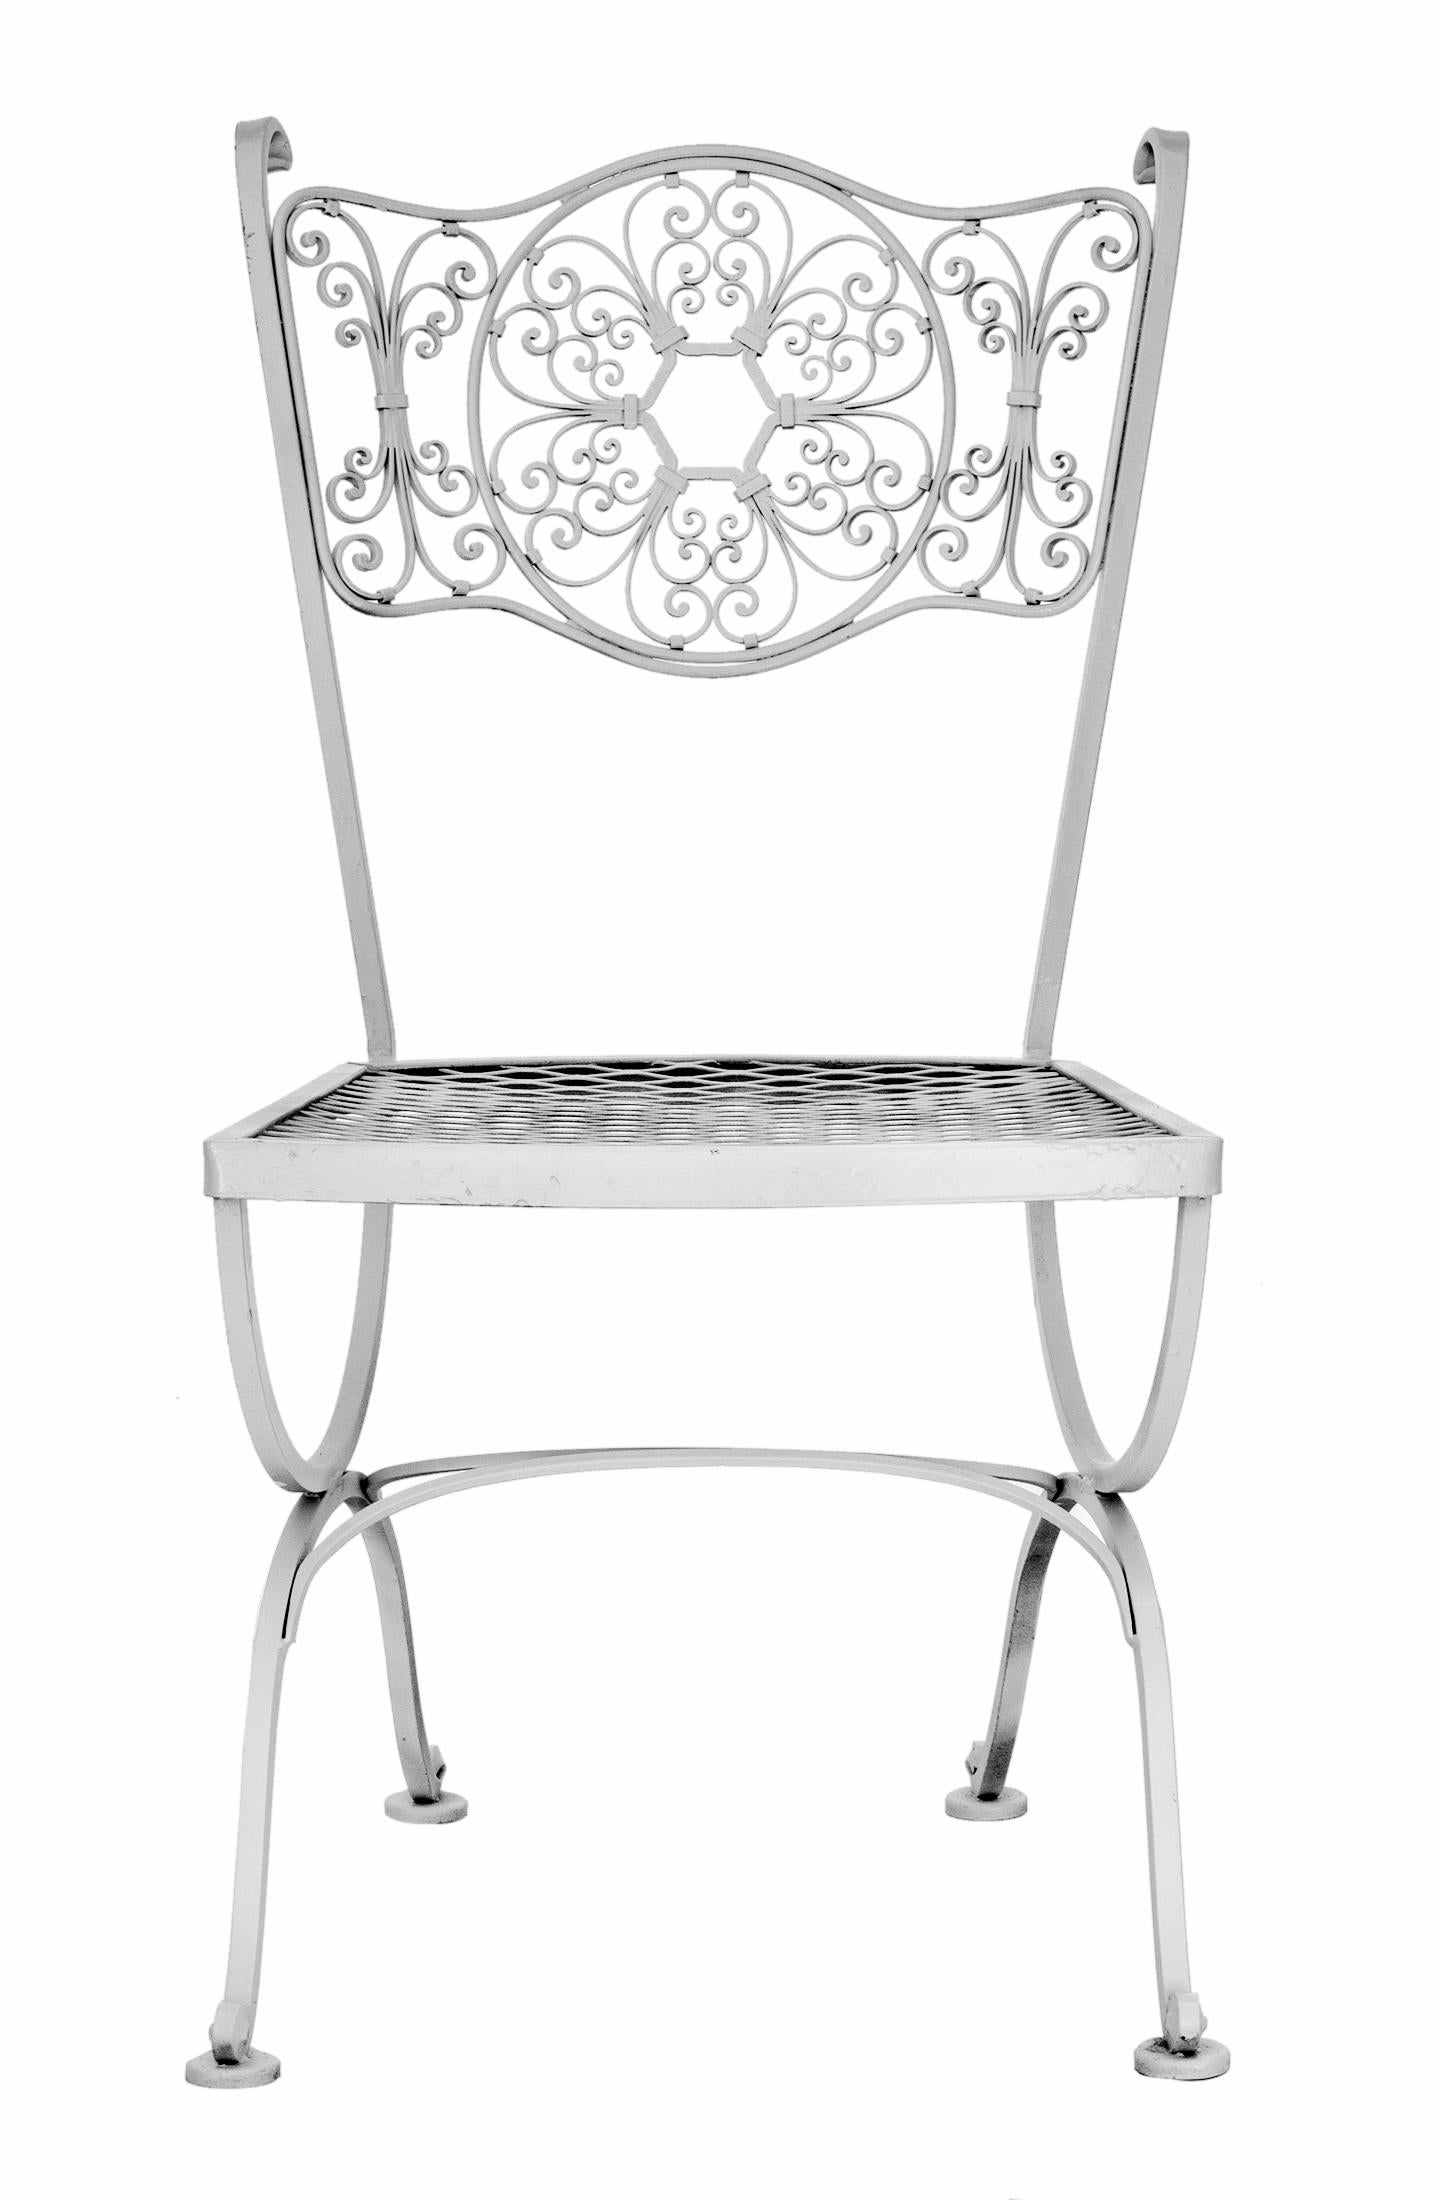 A rare set of five wrought iron chairs from the Andalusian collection by Woodard.
